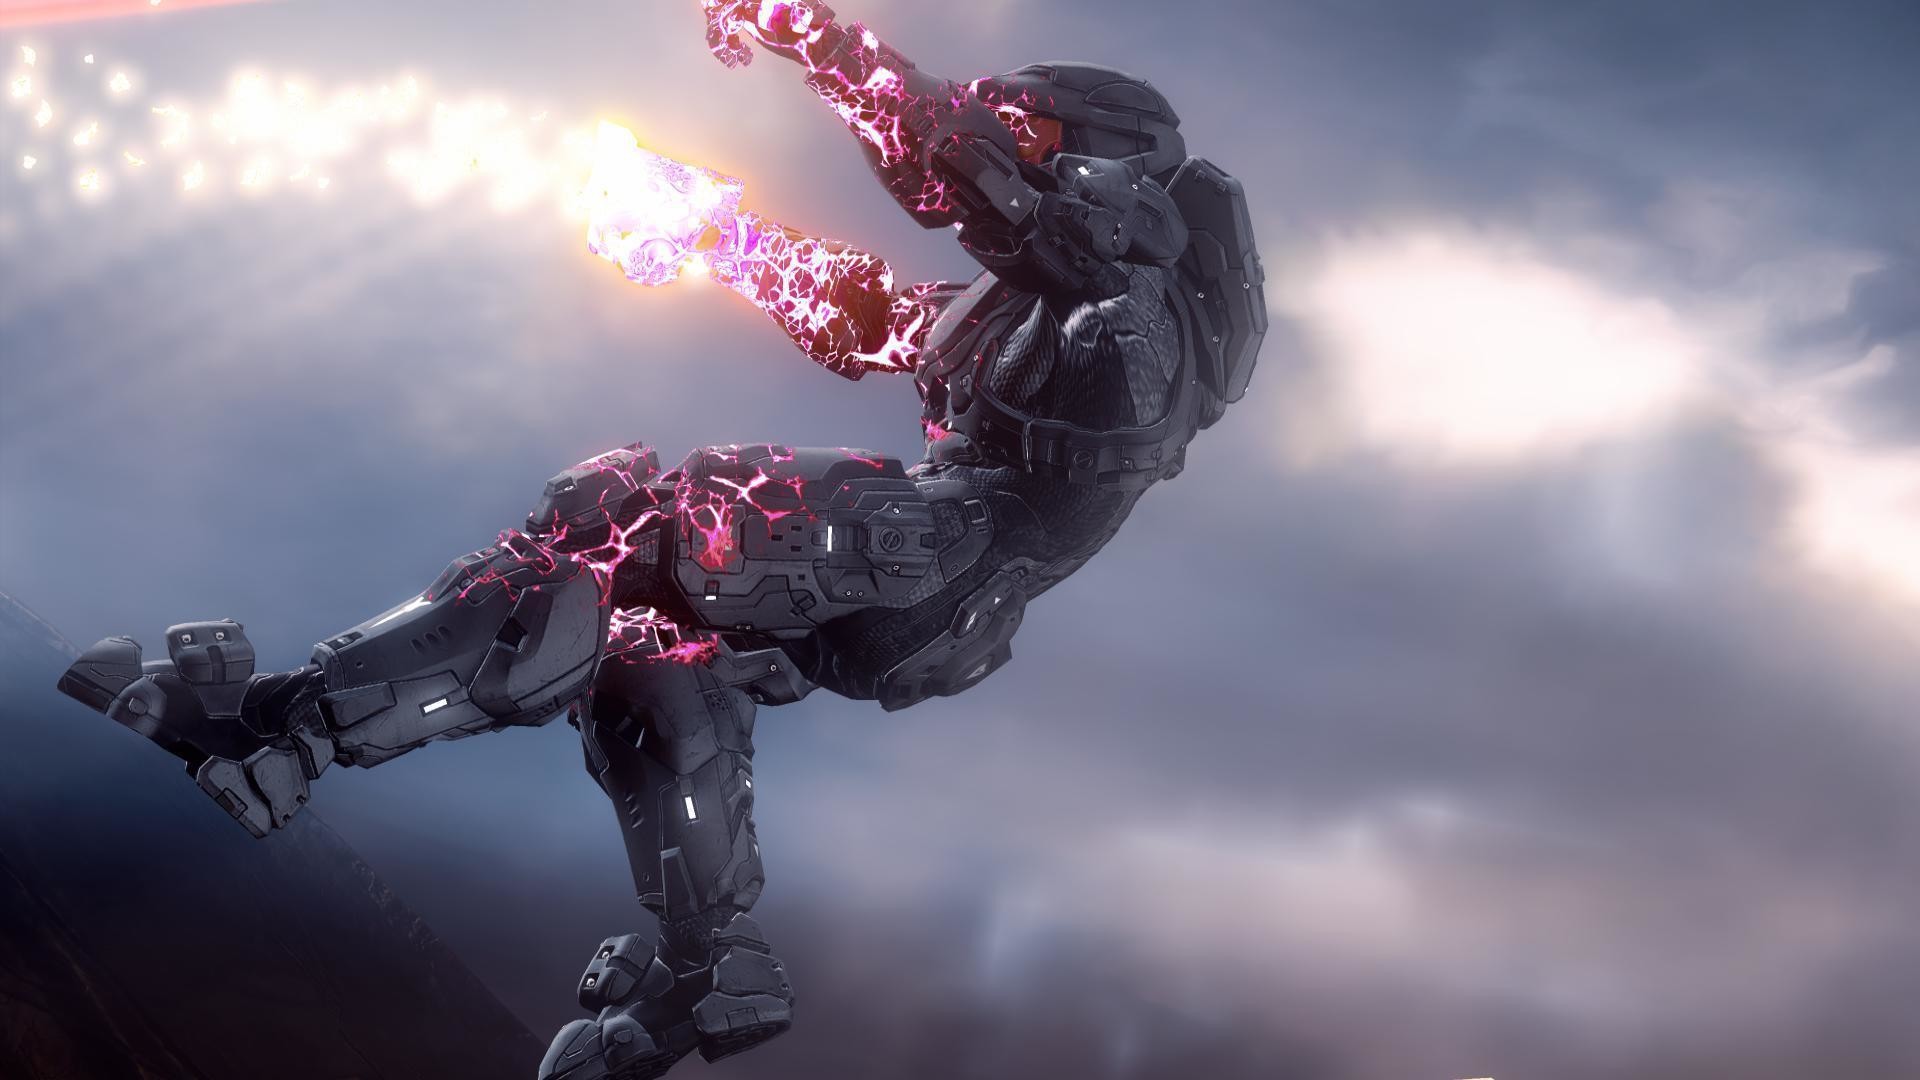 1920x1080 Halo 4 Wallpapers and Backgrounds